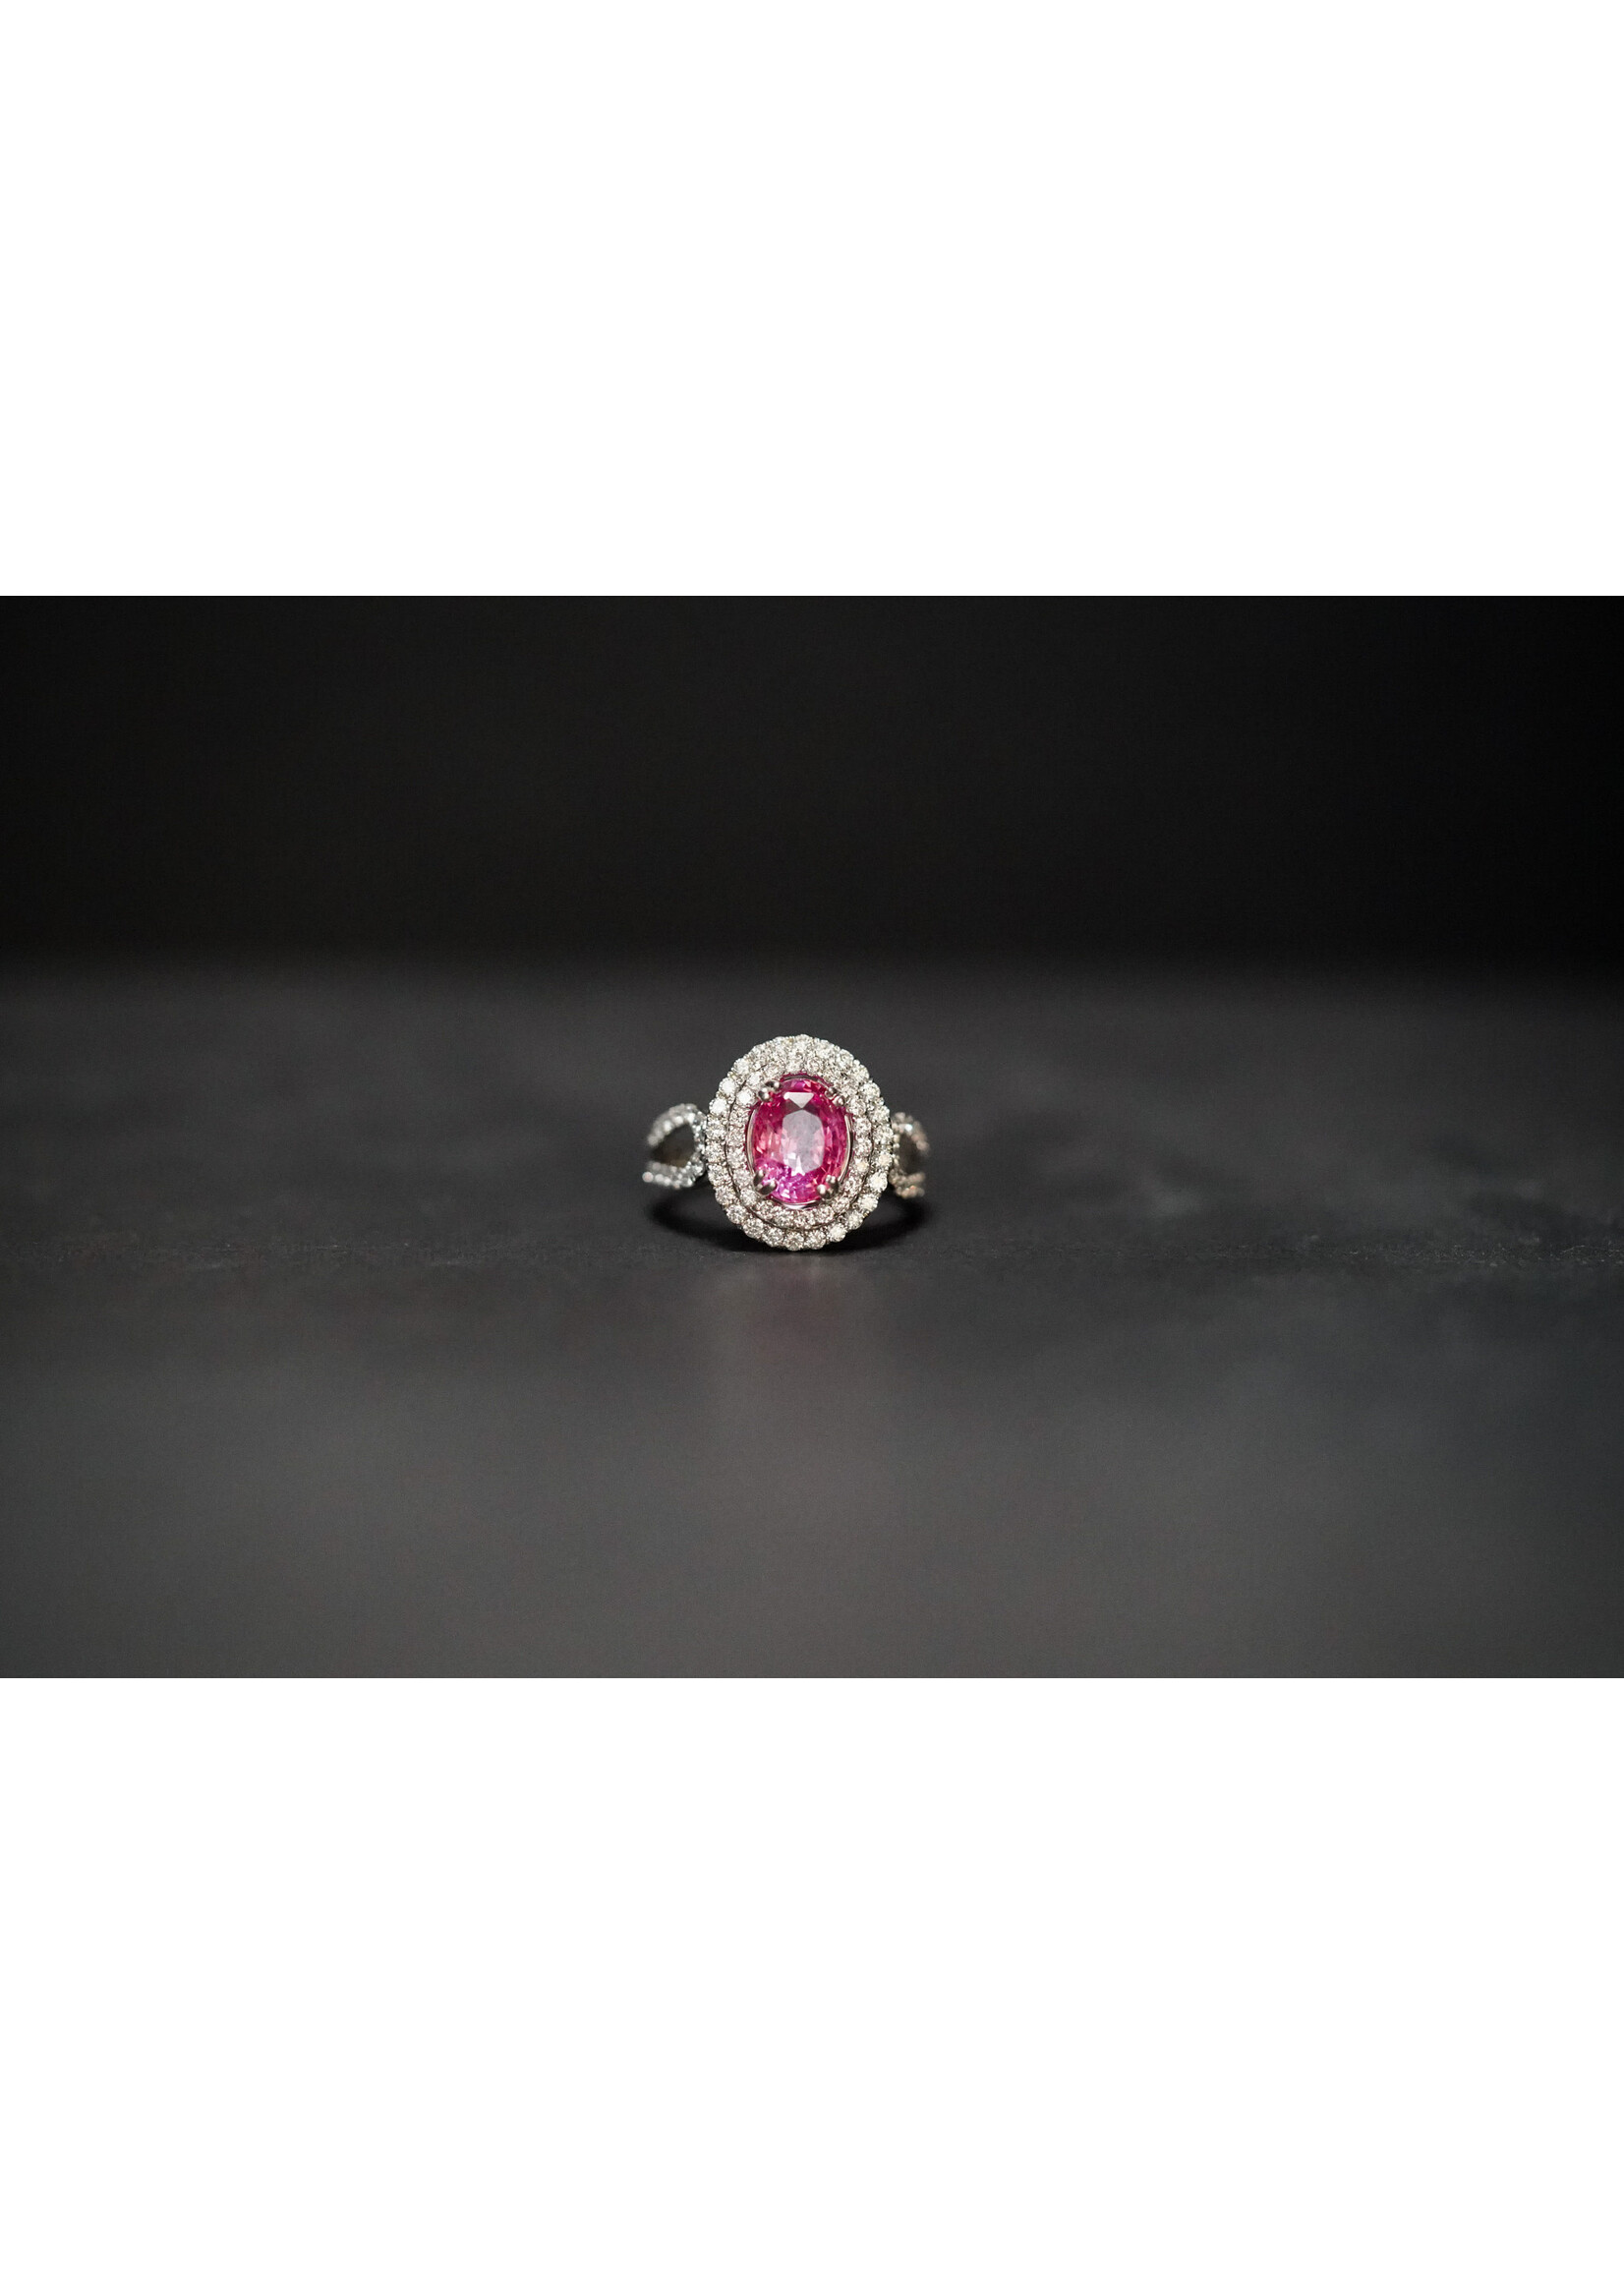 18KW 3.56ctw (2.66ctr) Oval Pink Sapphire Double Halo Ring (size 7)